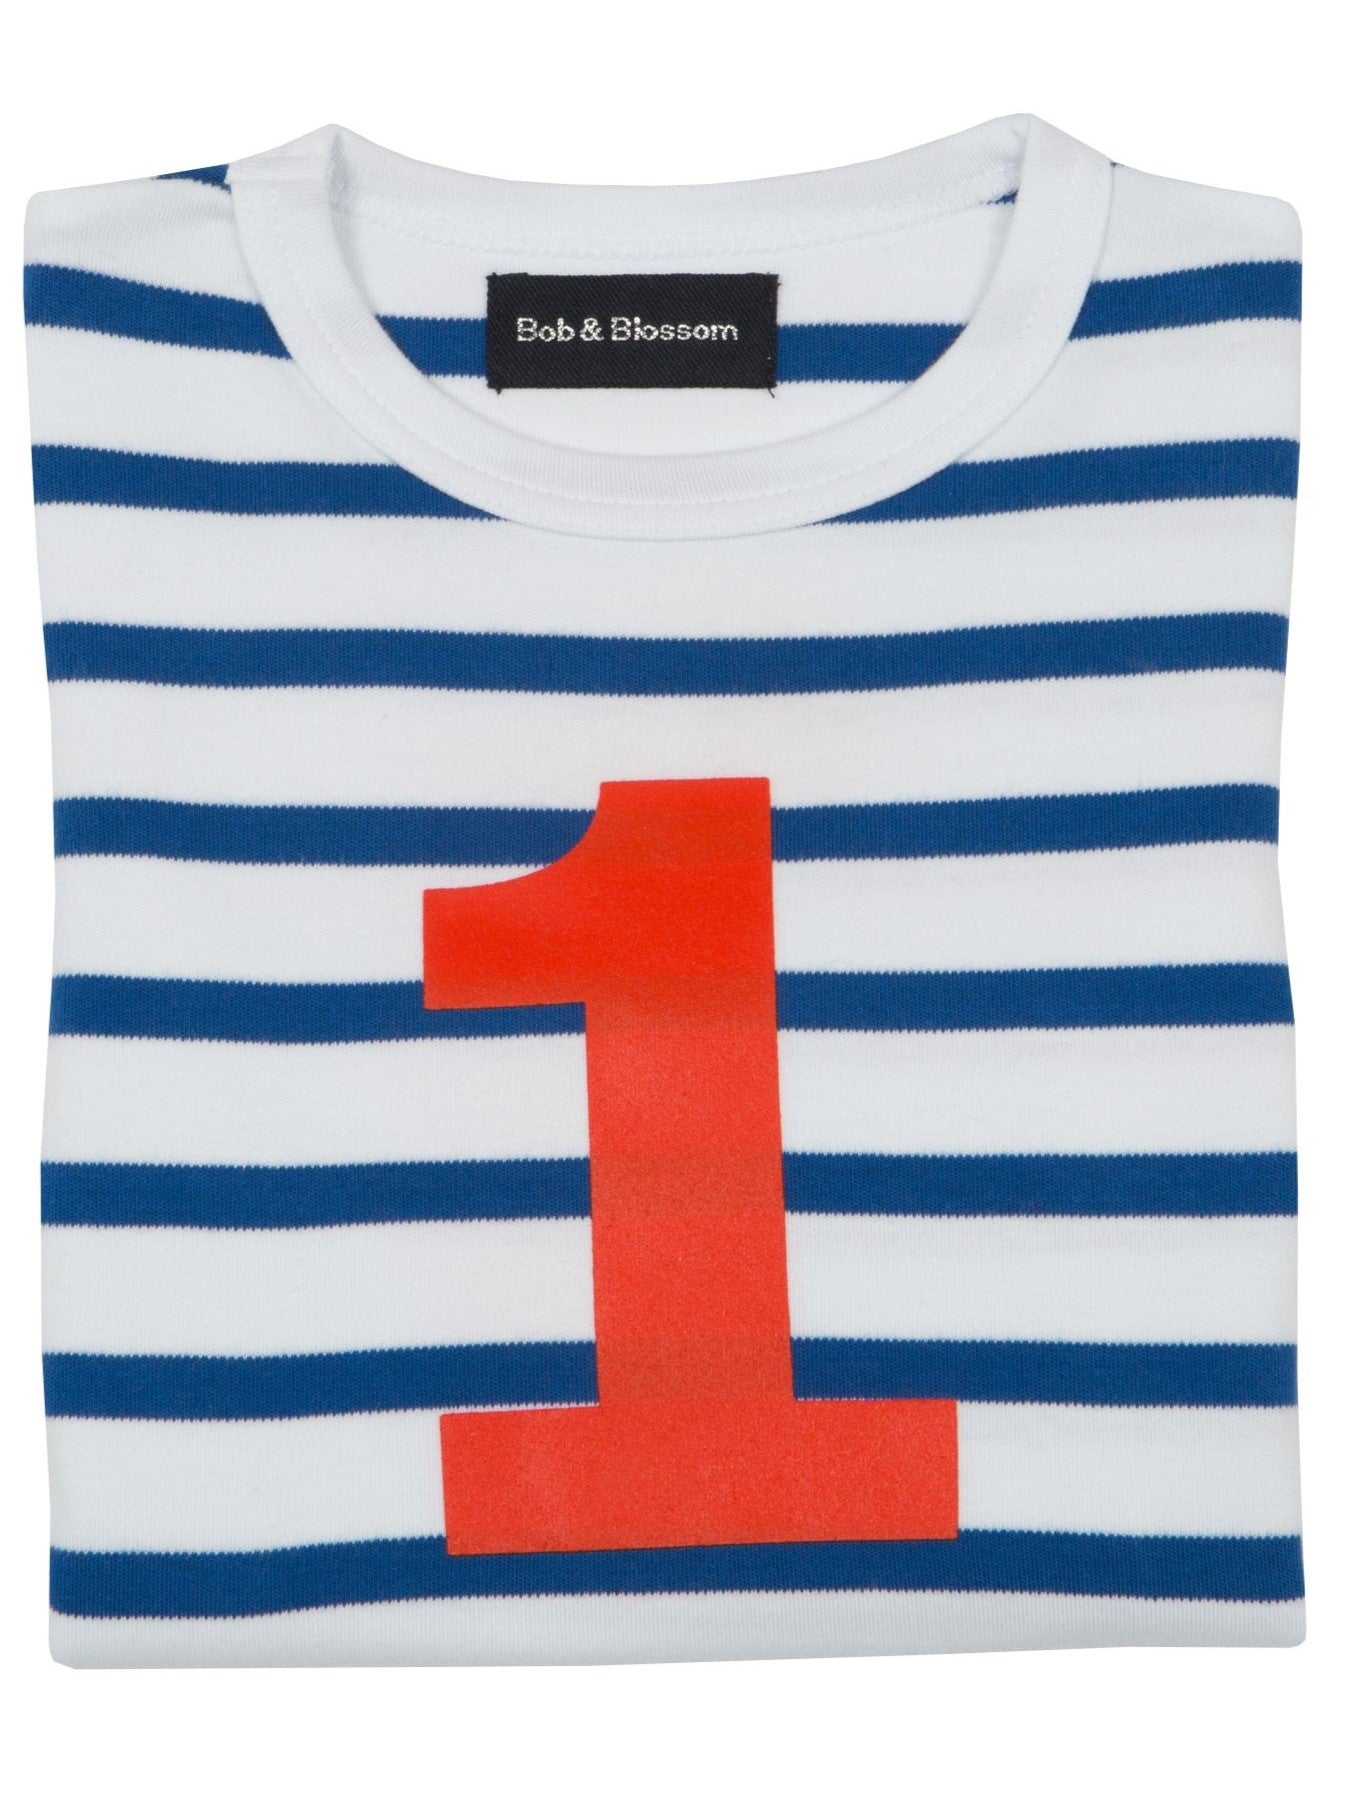 french blue and white striped top with red number printed on the front